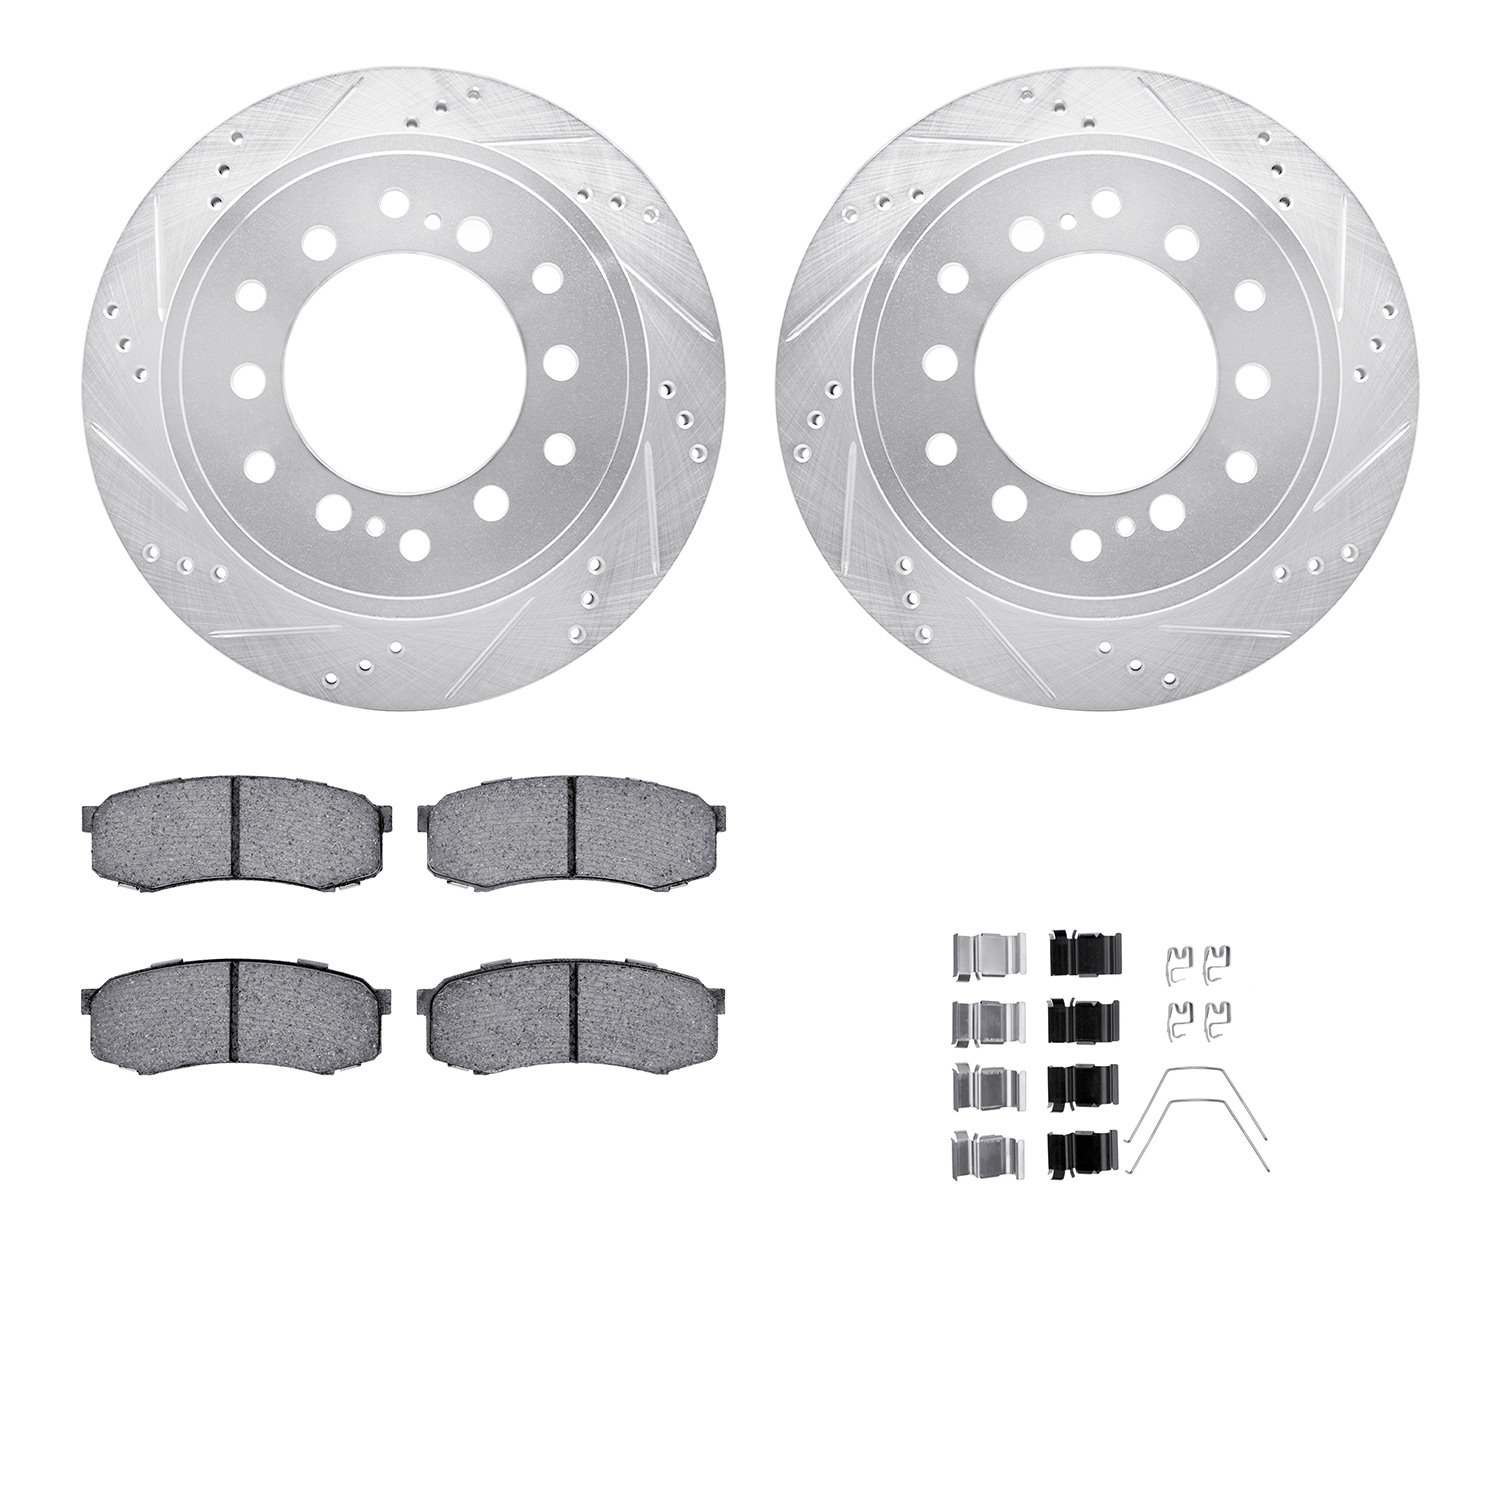 7412-76023 Drilled/Slotted Brake Rotors with Ultimate-Duty Brake Pads Kit & Hardware [Silver], Fits Select Lexus/Toyota/Scion, P